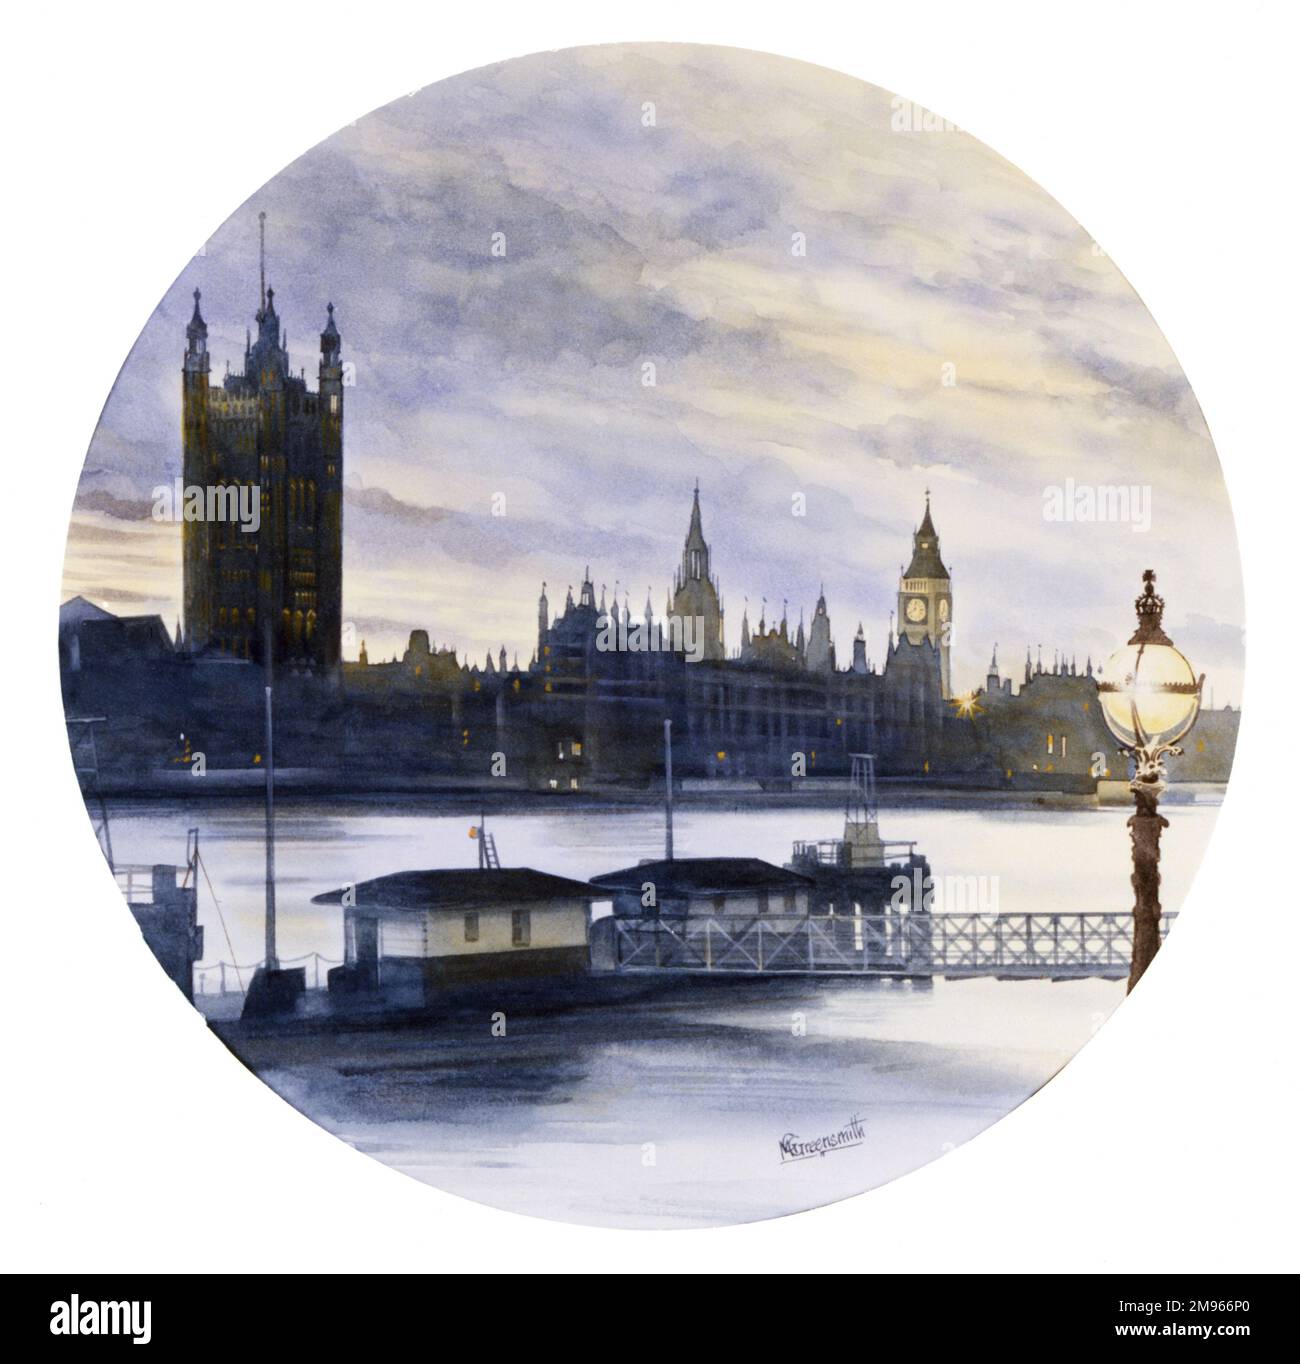 A view toward the Houses of Parliament from the southern bank of the River Thames in London. Painting by Malcolm Greensmith Stock Photo